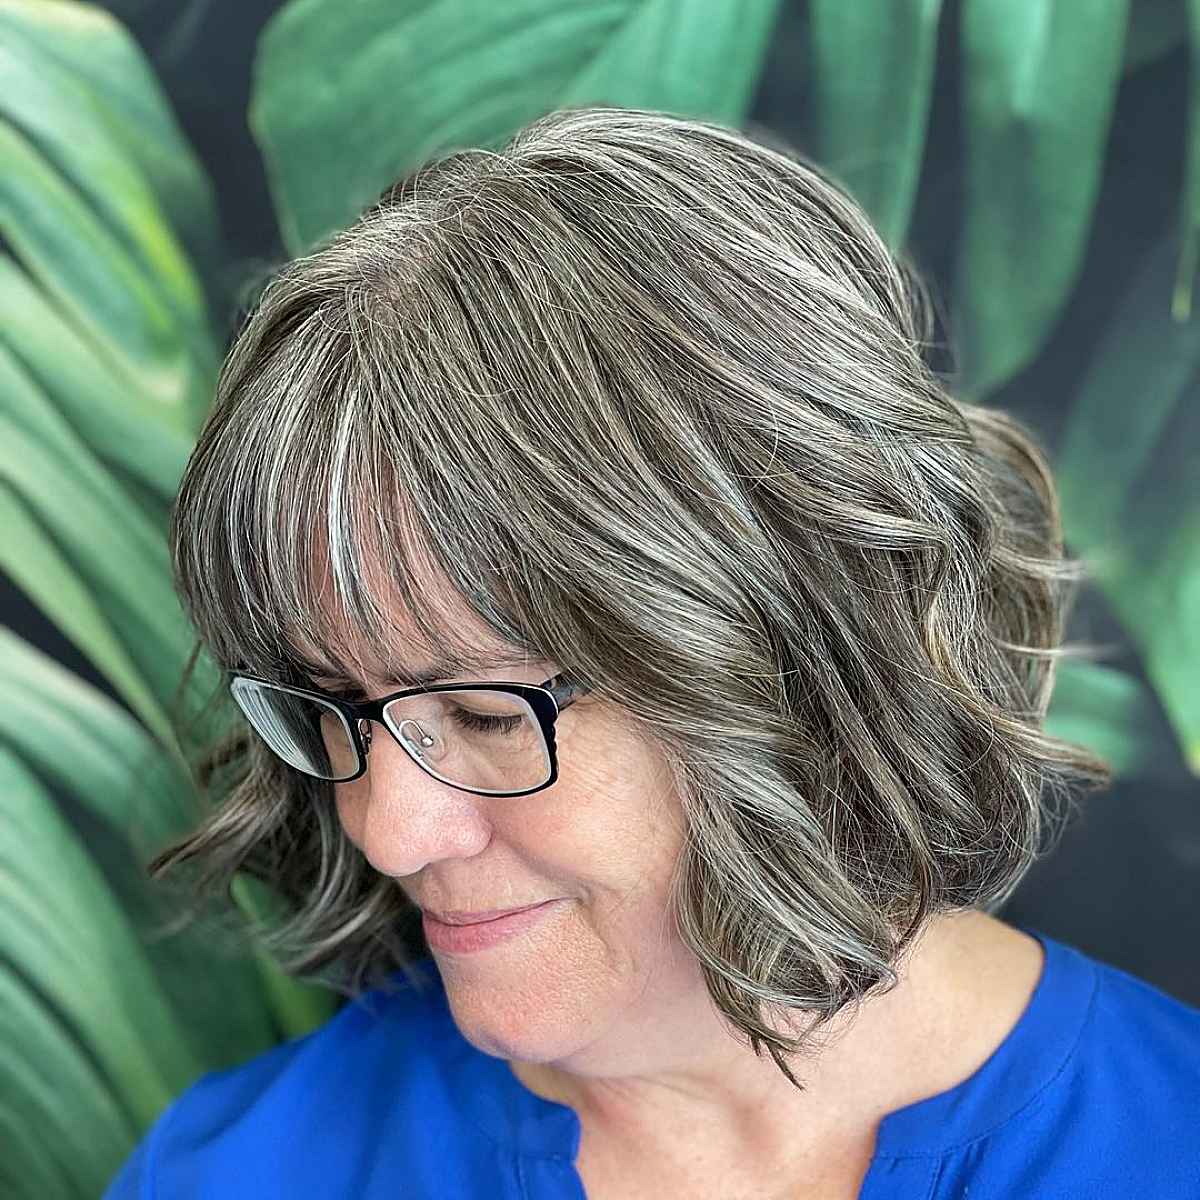 Tousled Bob with Bangs with Glasses